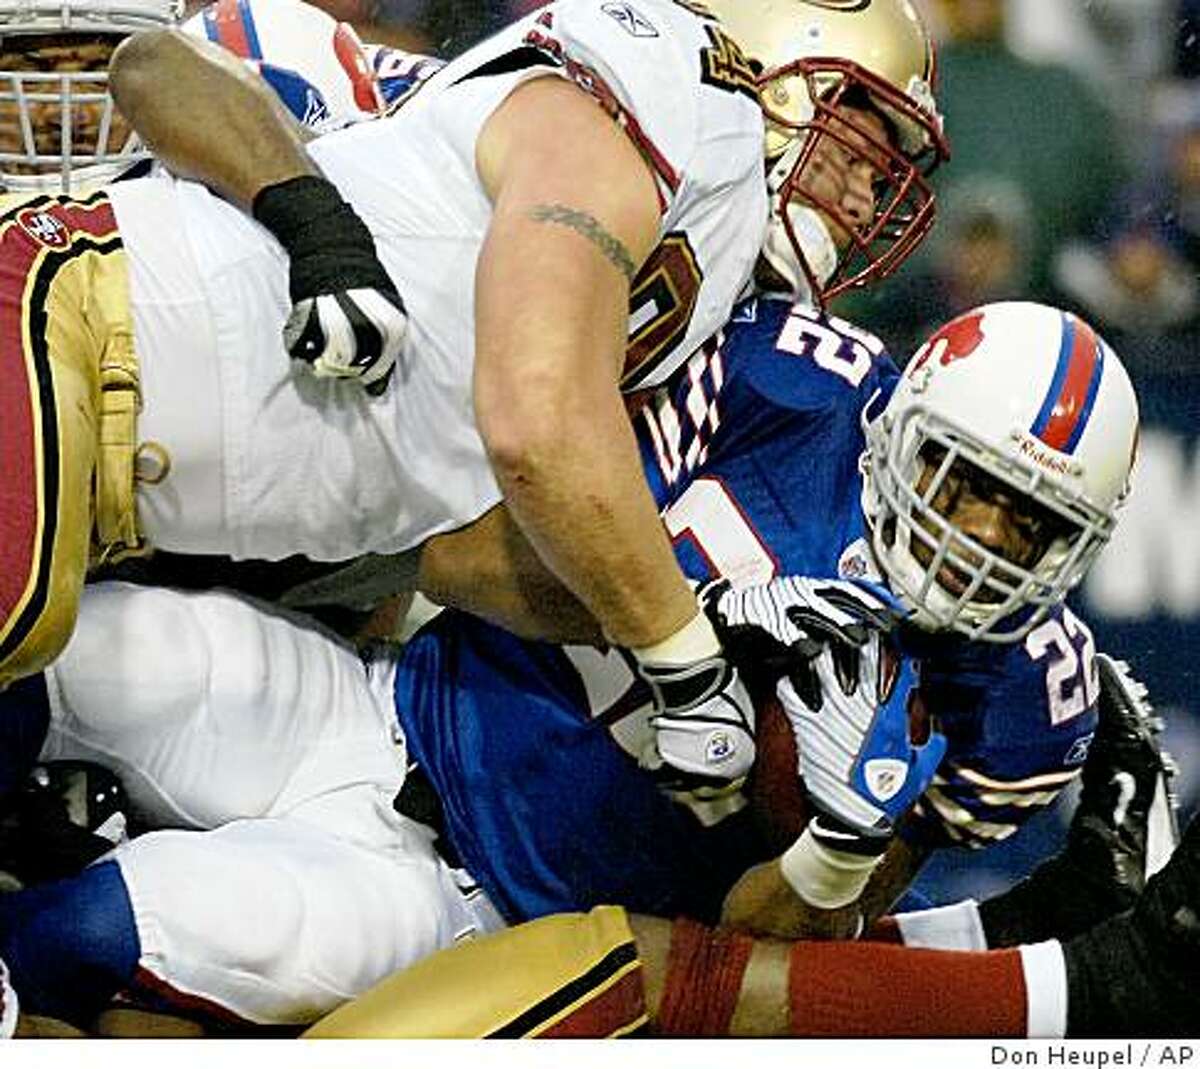 Buffalo Bills running back Fred Jackson, right, is tackled by San Francisco 49ers defensive end Justin Smith during the second half of an NFL football game at Ralph Wilson Stadium in Orchard Park, N.Y. on Sunday, Nov. 30, 2008. San Francisco won 10-3. (AP Photo/Don Heupel)